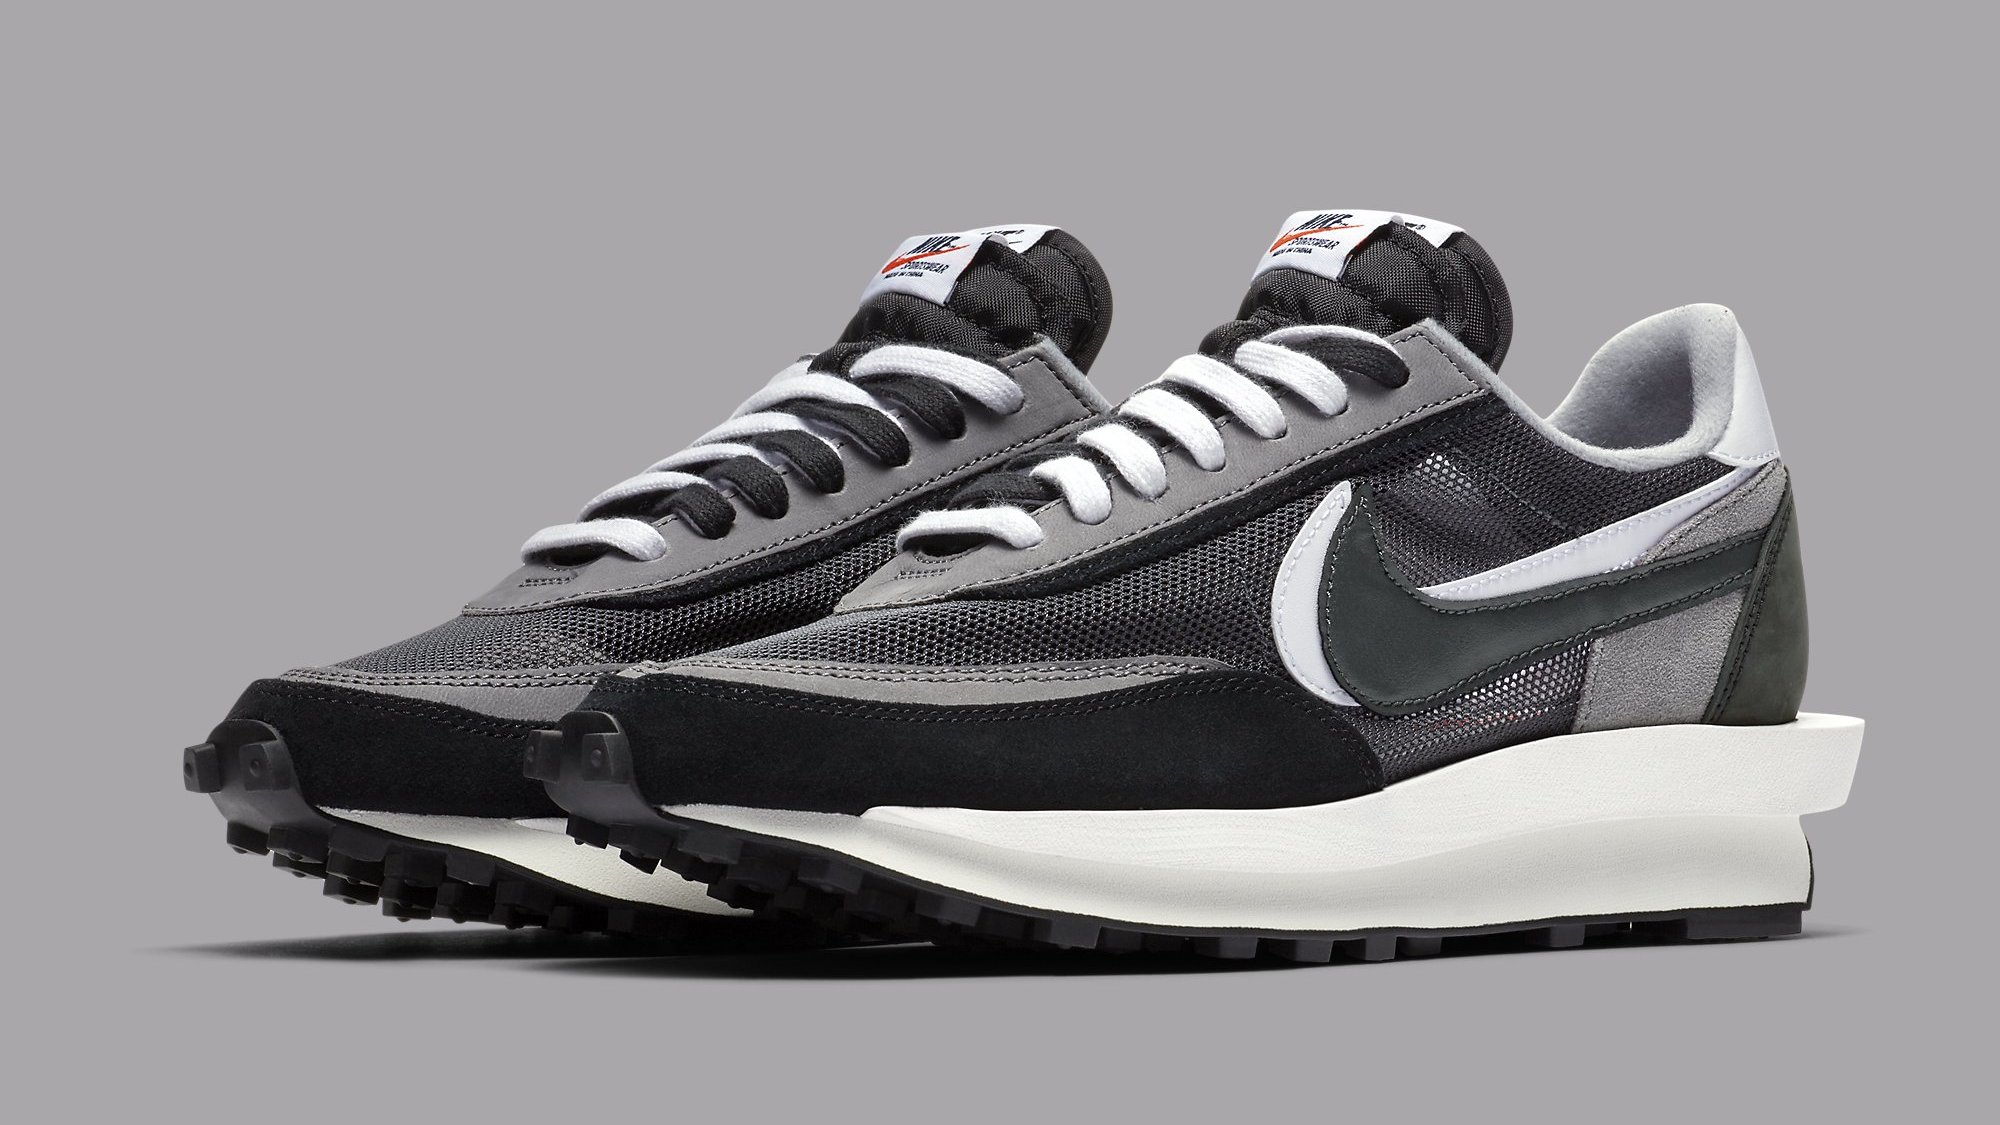 Sacai x Nike LDWaffles Releasing in Black and White | Complex